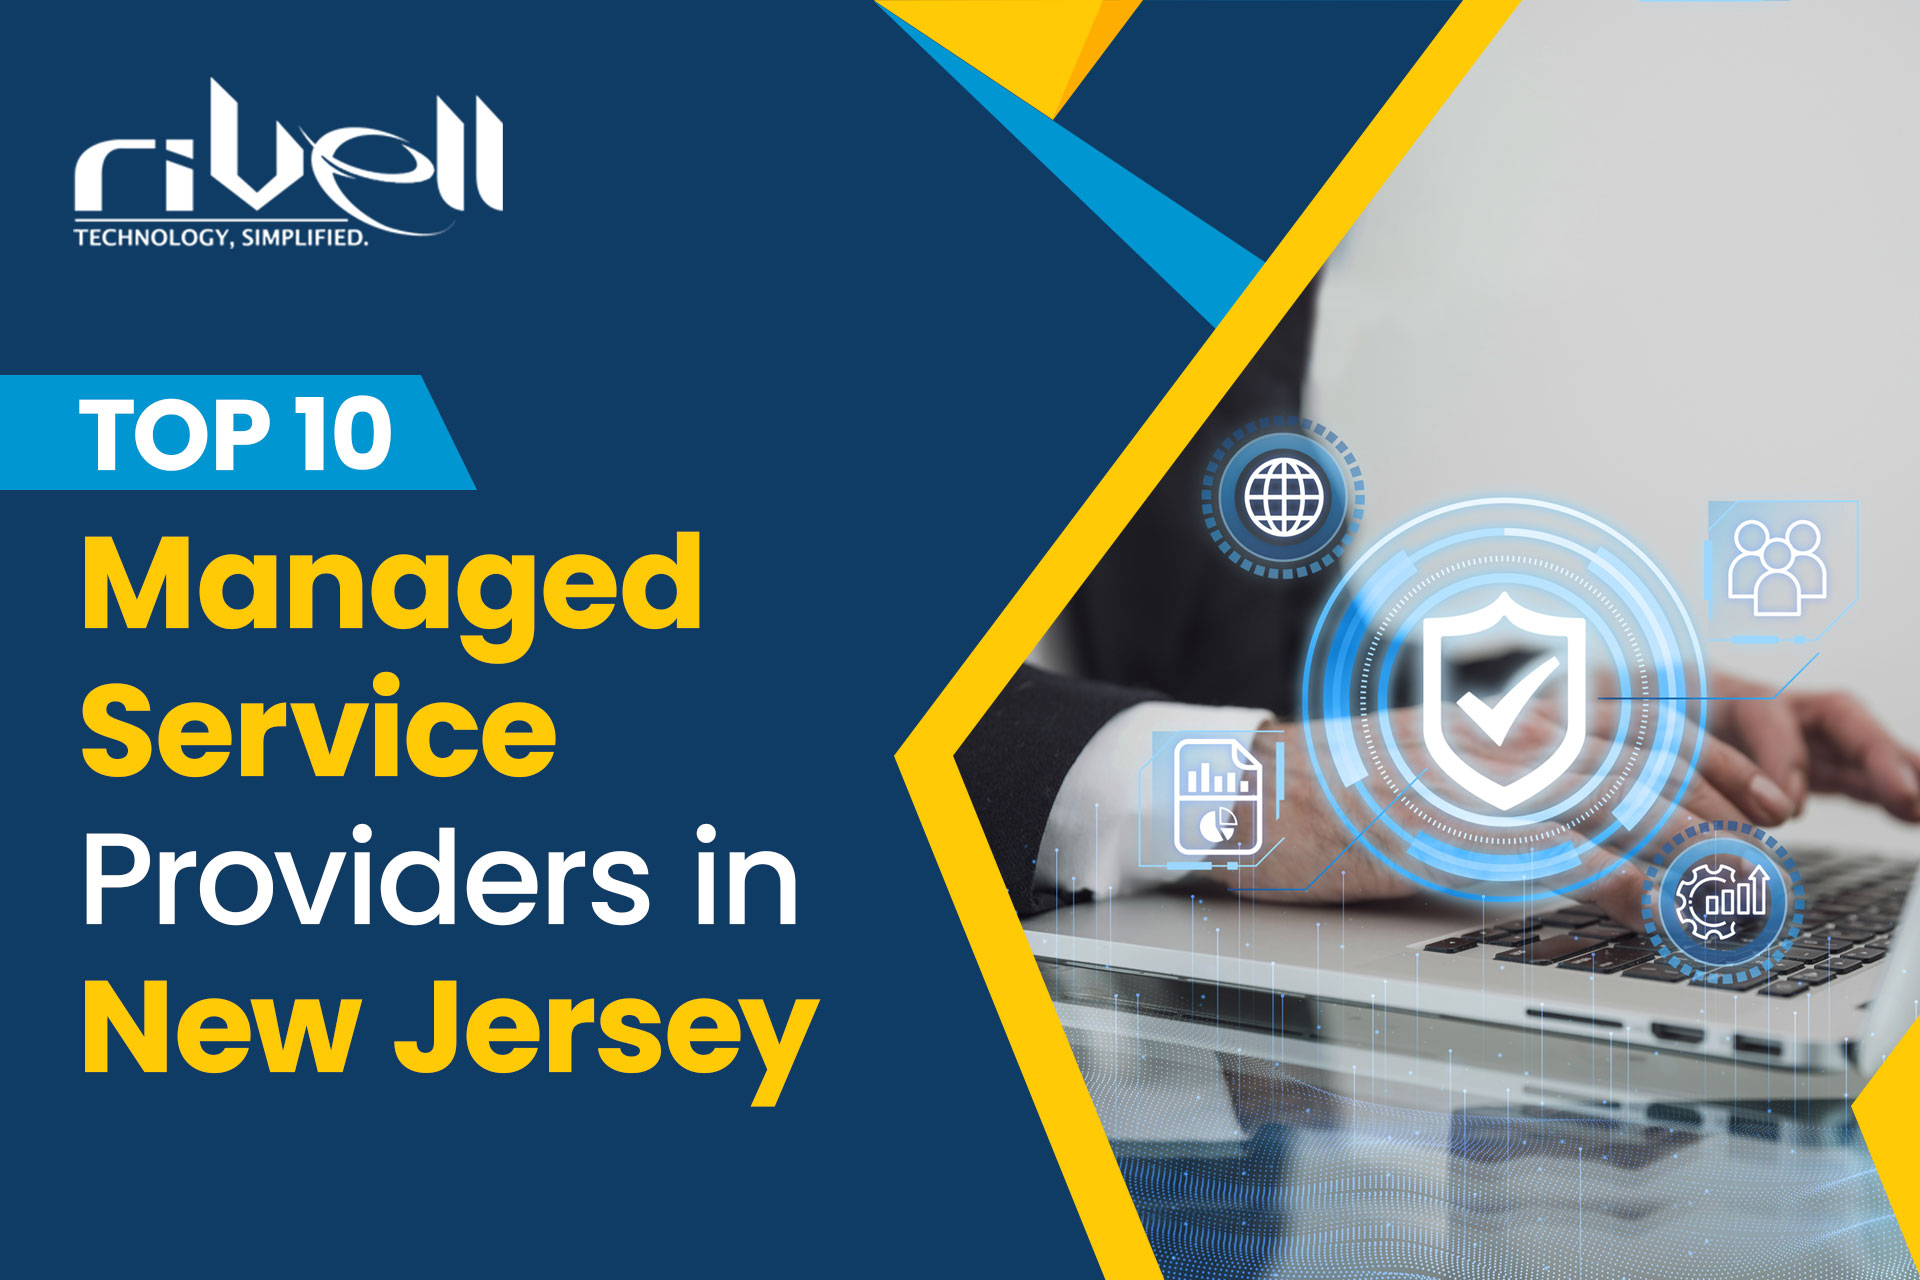 Top 10 Managed Service Providers in New Jersey